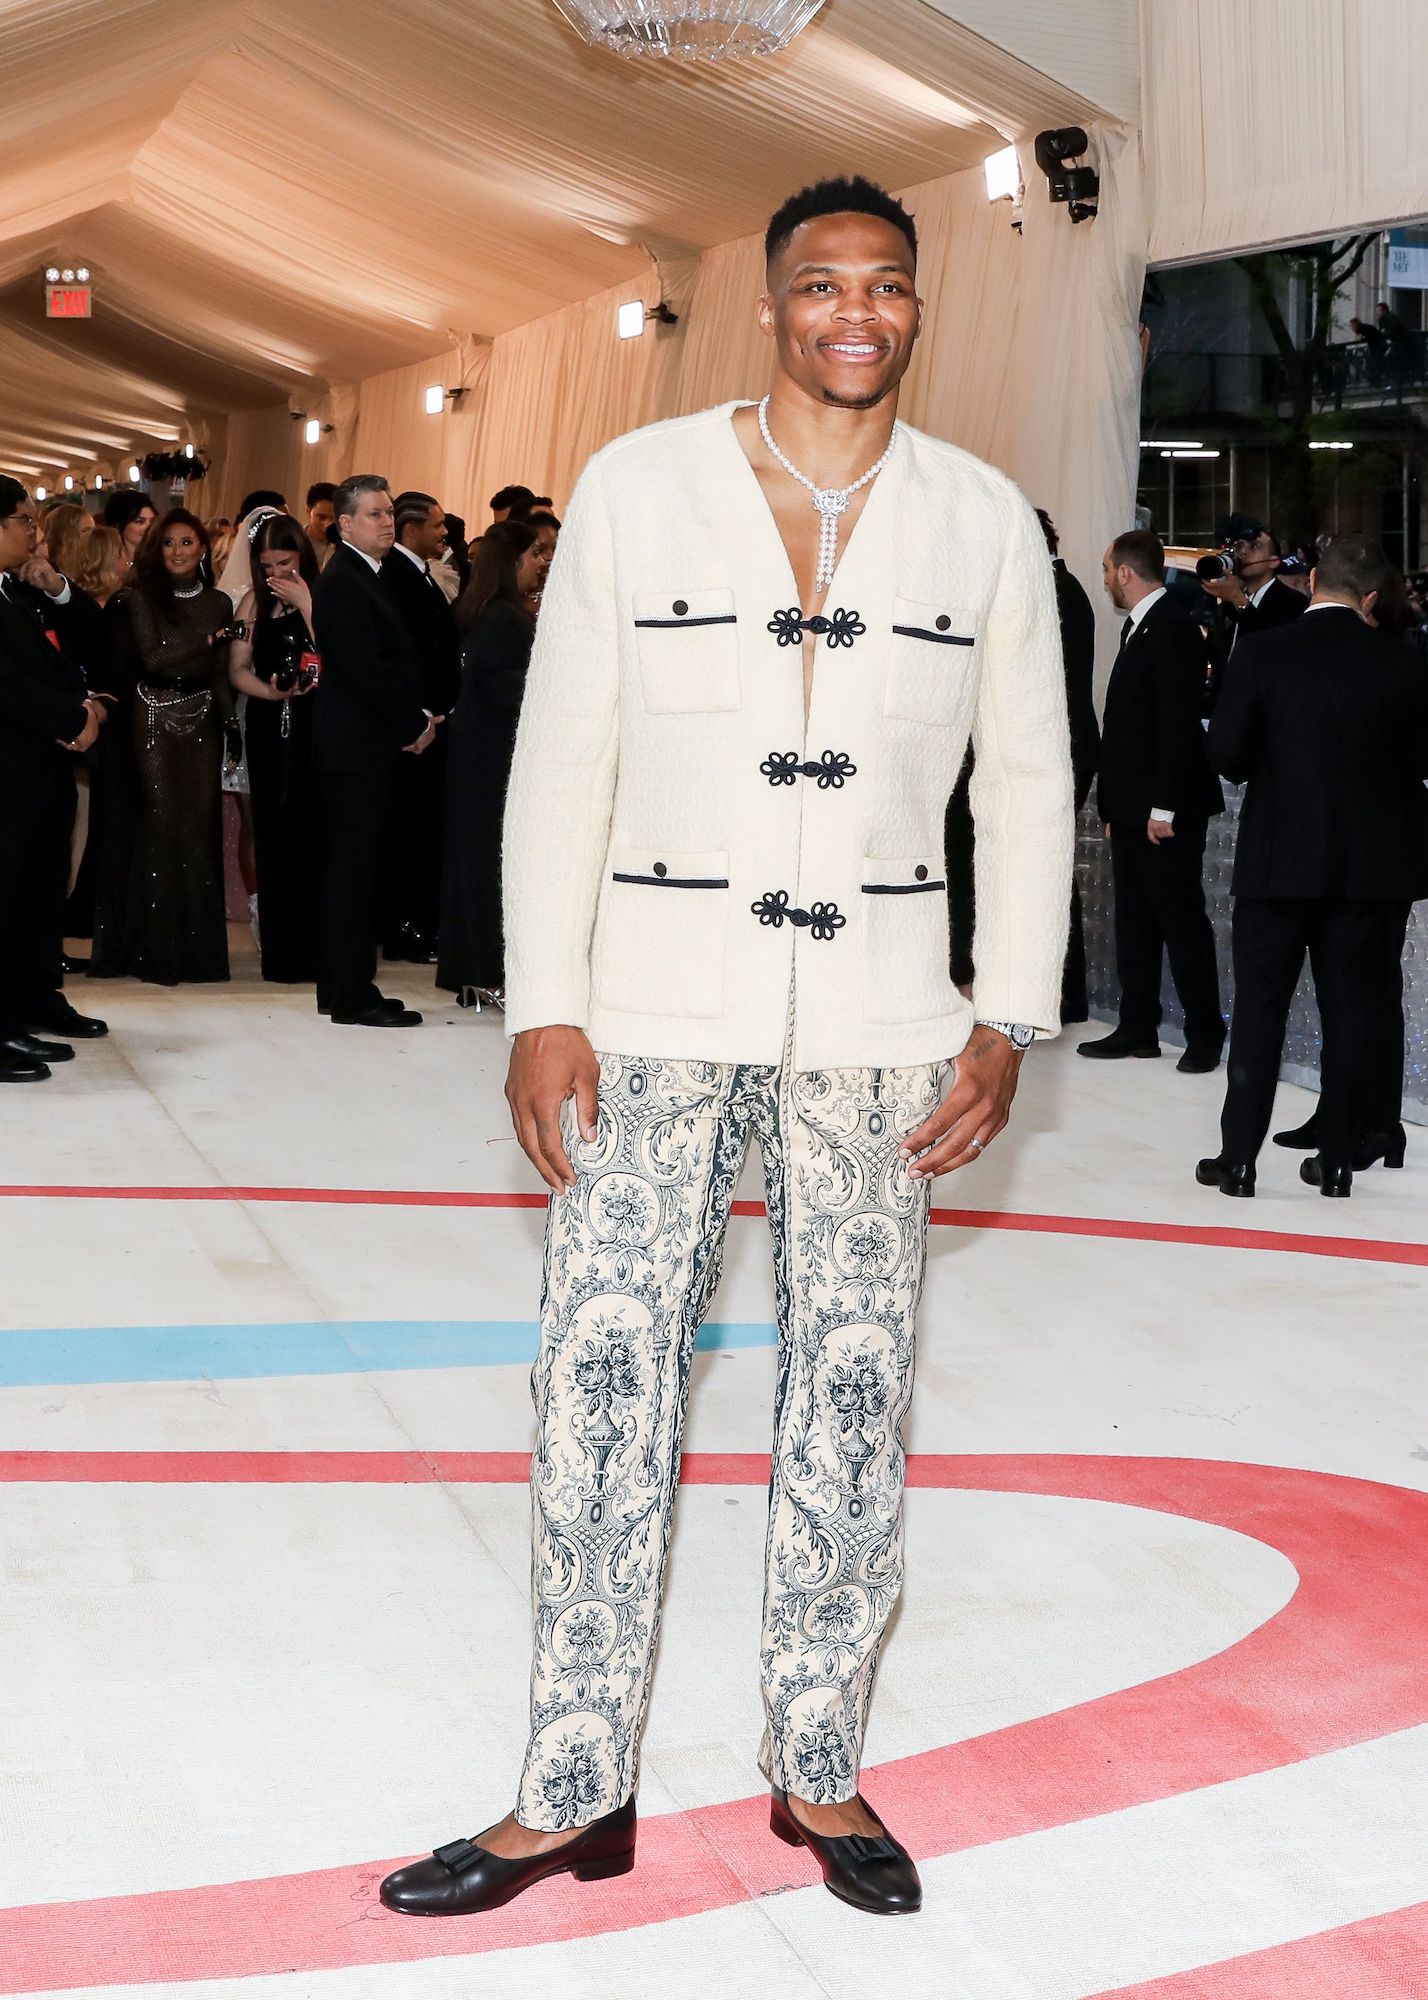 The Most Stylish NBA Players Ever